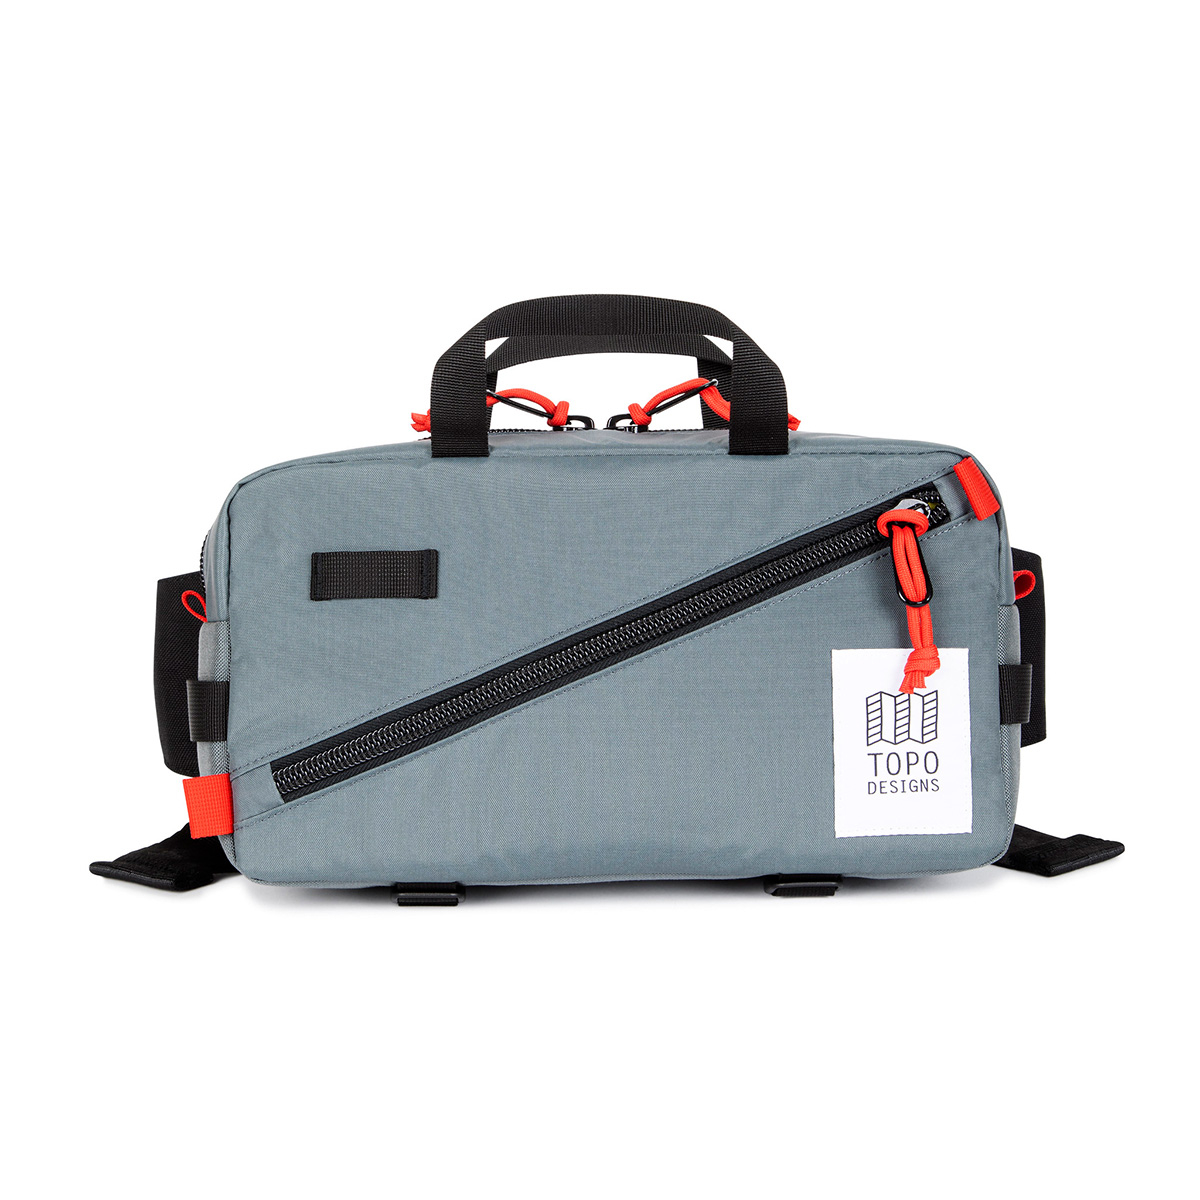 Topo Designs Quick Pack Charcoal, can be slung over your shoulder or worn around your waist, fanny pack style